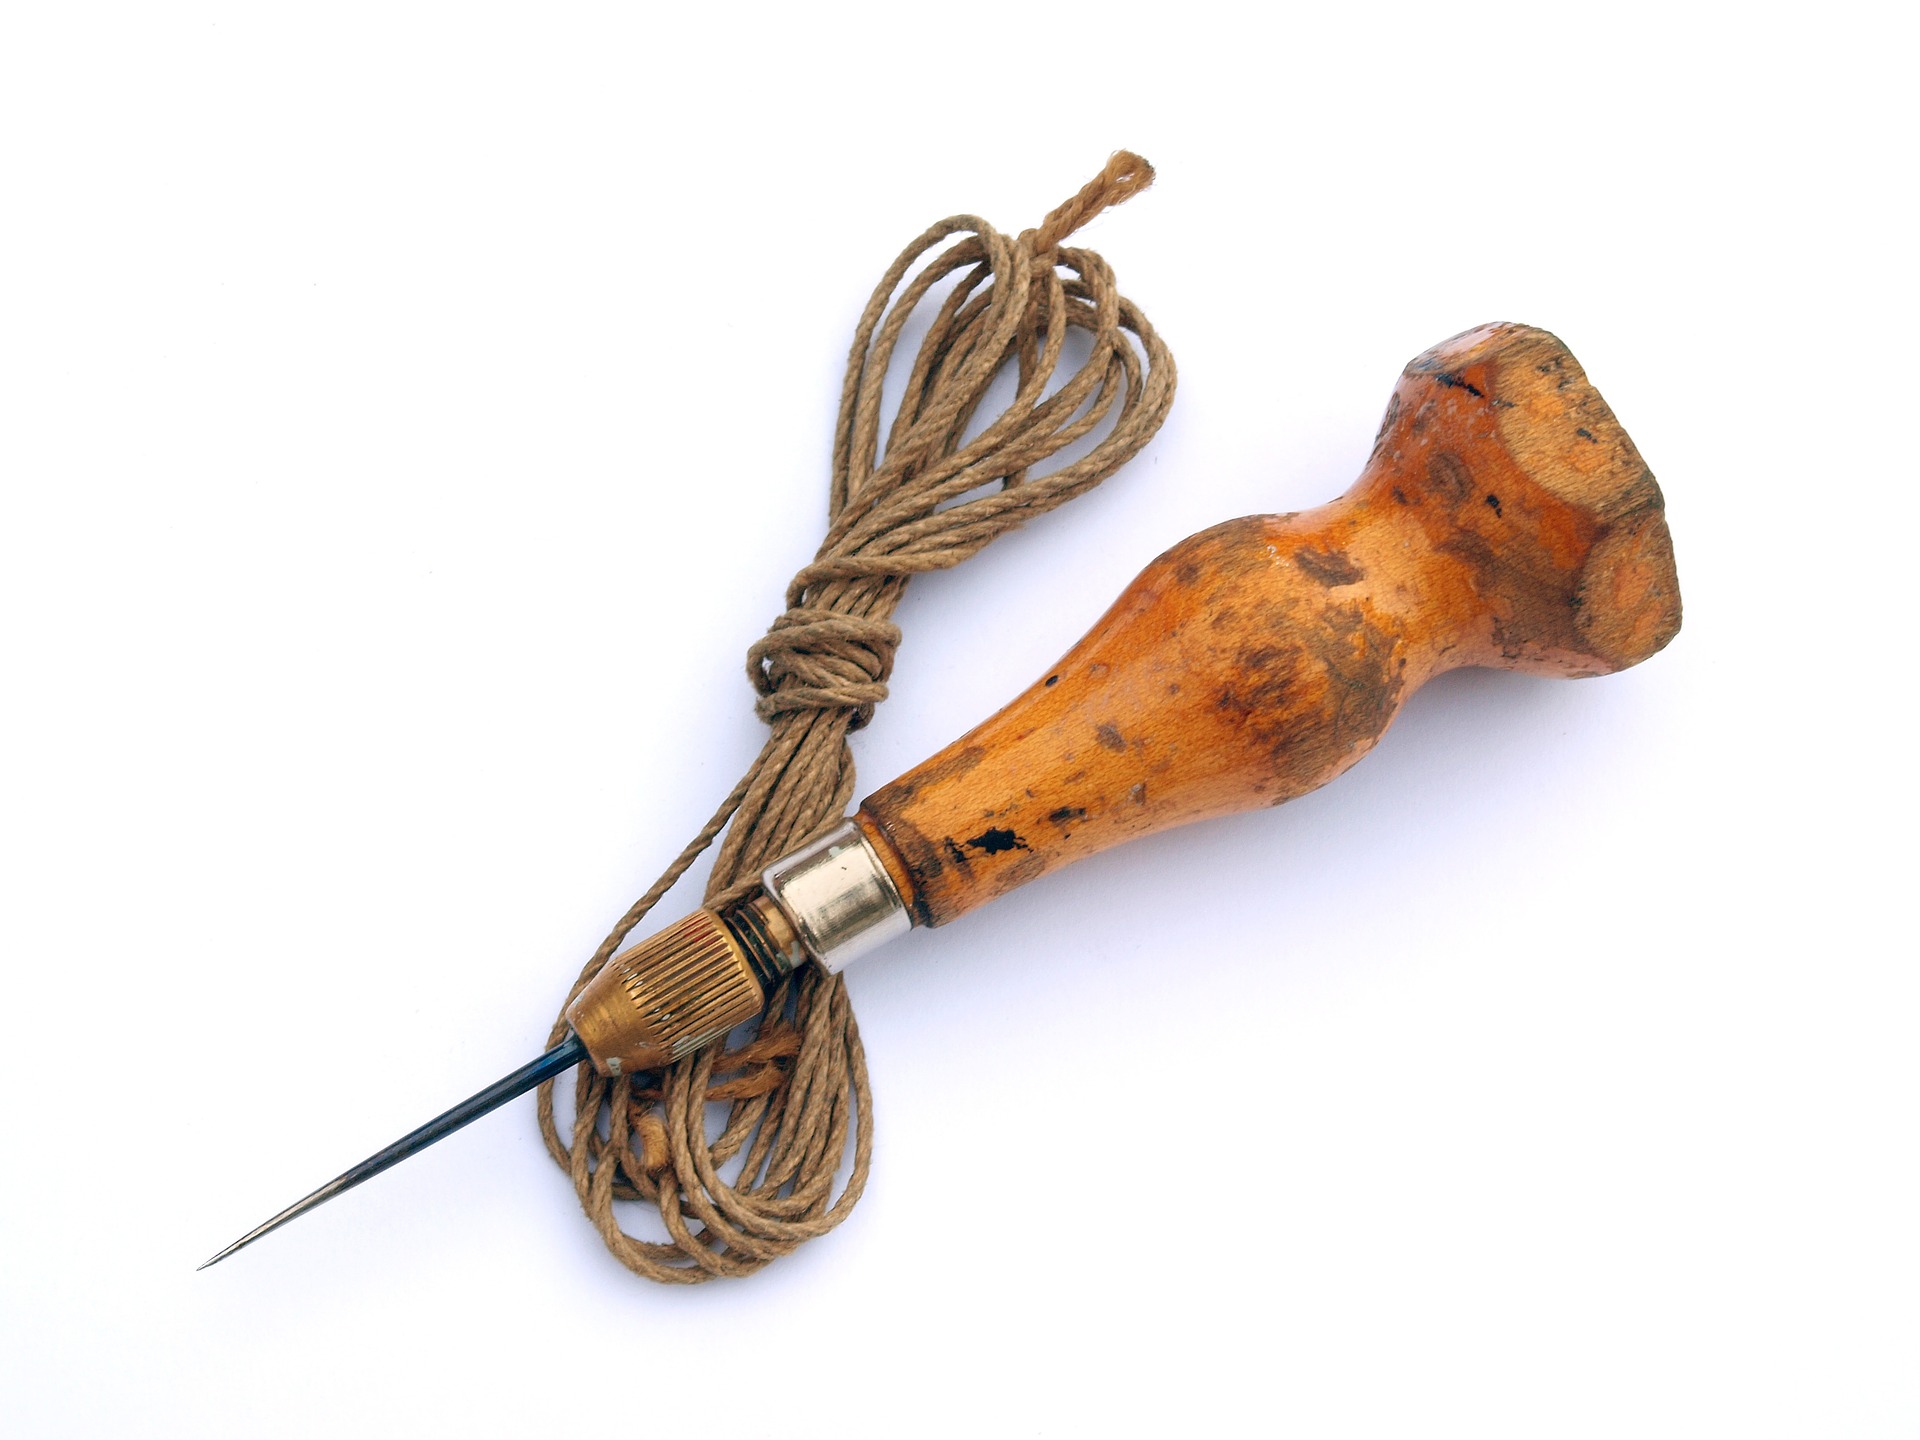 Awl and String